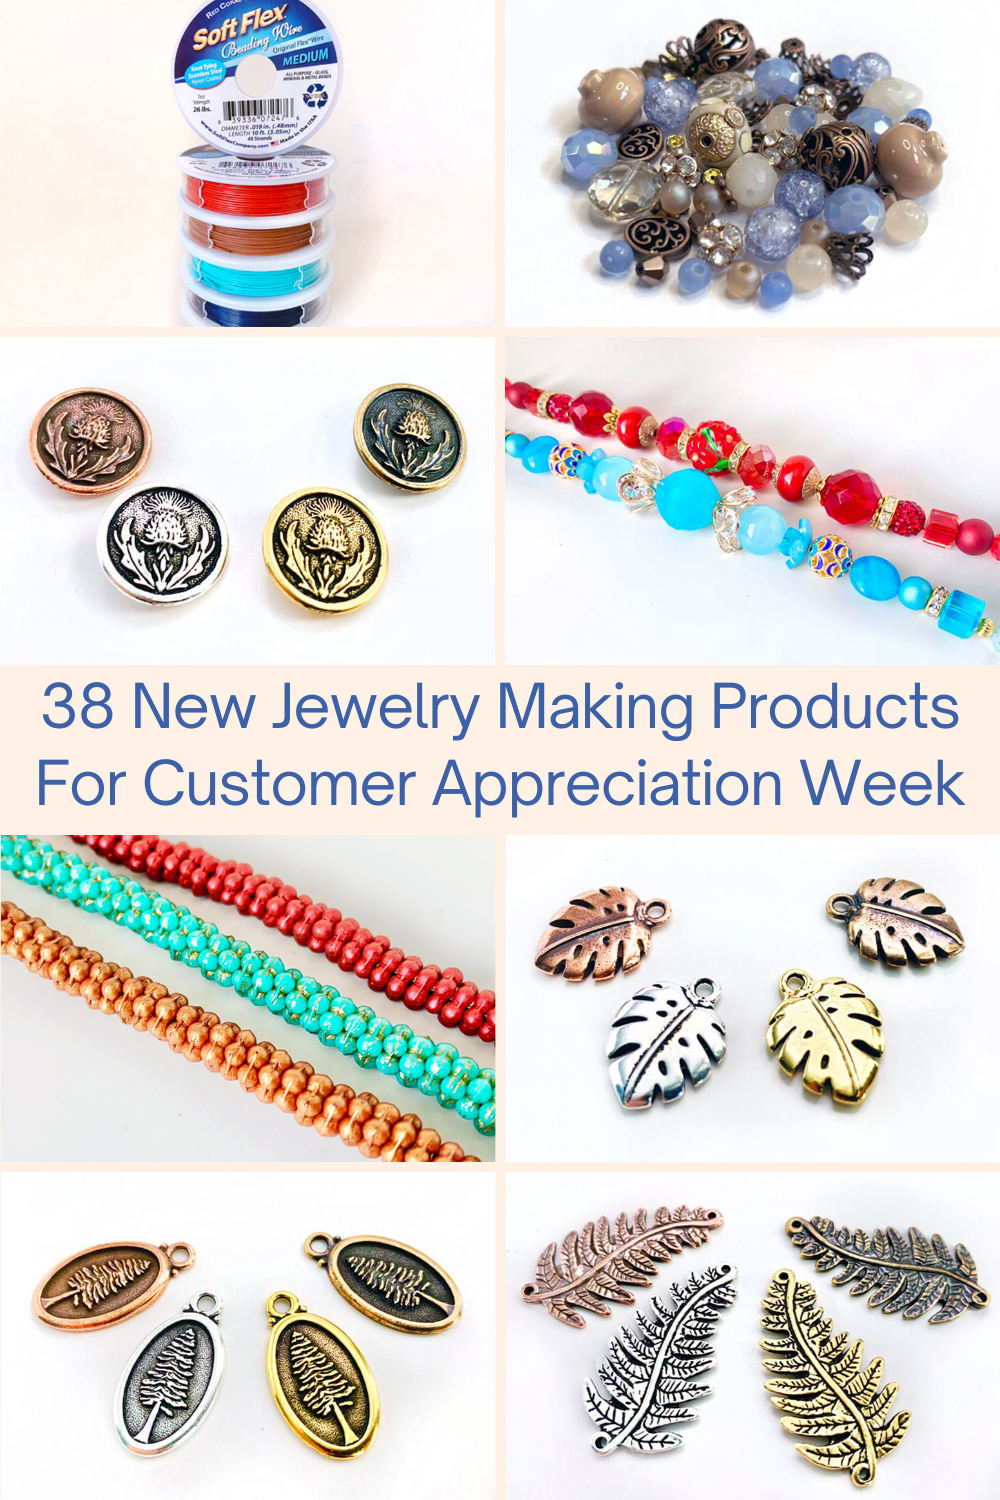 38 New Jewelry Making Products For Customer Appreciation Week Collage